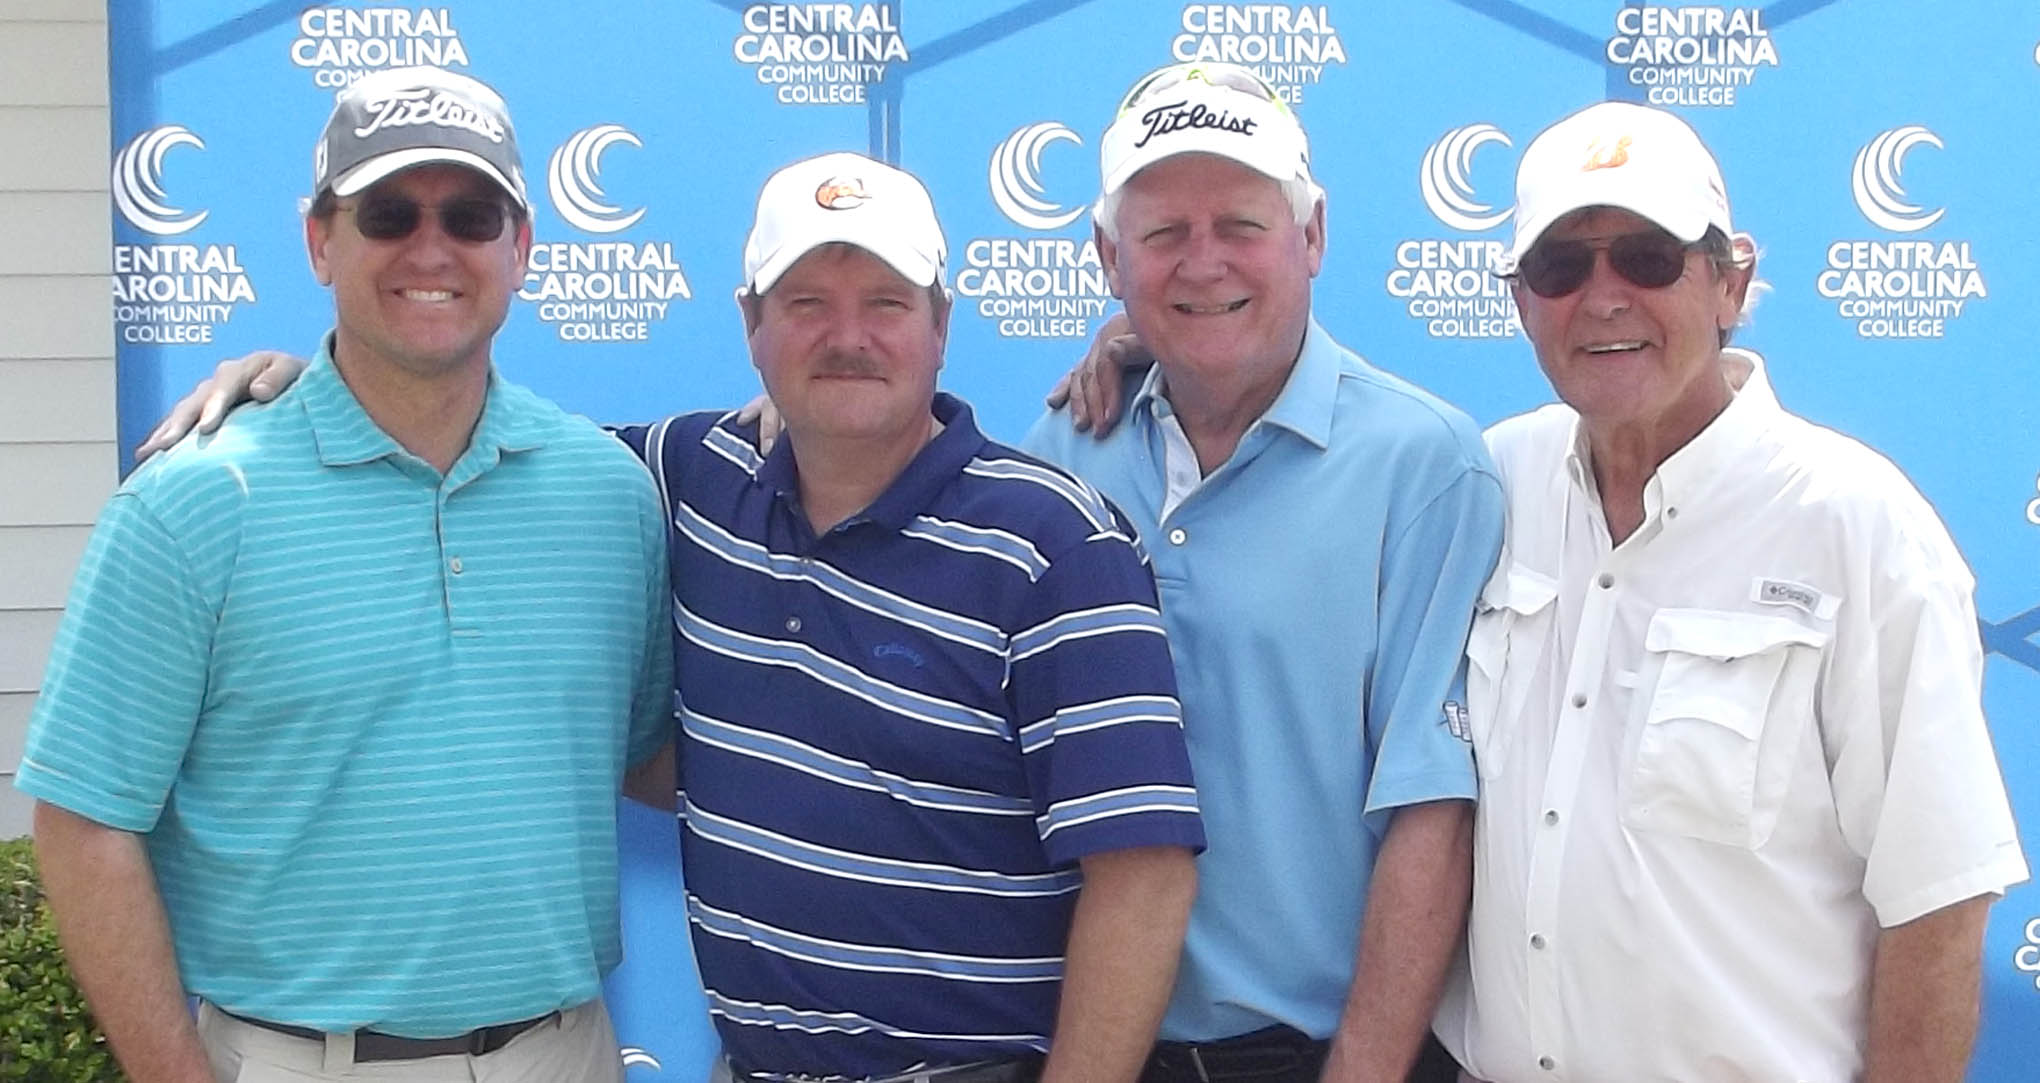 Click to enlarge,  Members of the second flight winning team in the fifth Central Carolina Community College Foundation Harnett Golf Classic were Badgett Womble, Bobby Womble, Brian Wieking, and Joe Wynns. For information about the Foundation, donating to it, establishing a scholarship, or other fund-raising events, contact Emily Hare, Executive Director of the CCCC Foundation, 919-718-7230. Information is also available at the CCCC Foundation website, www.cccc.edu/foundation. 